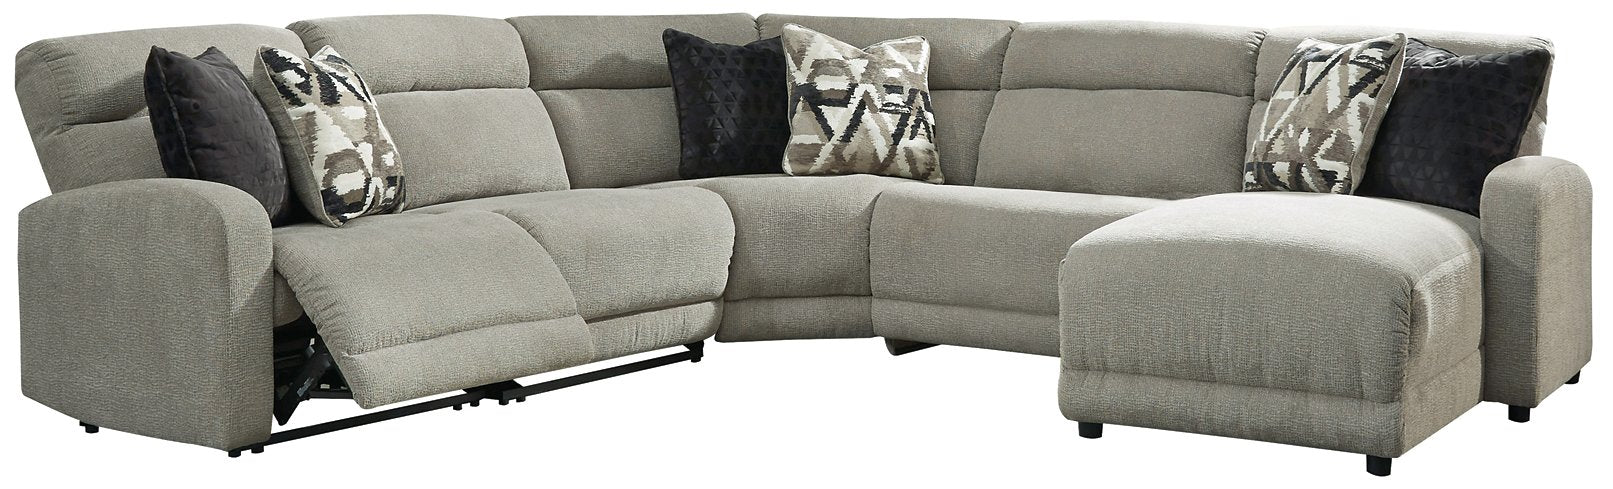 Colleyville Power Reclining Sectional - Half Price Furniture